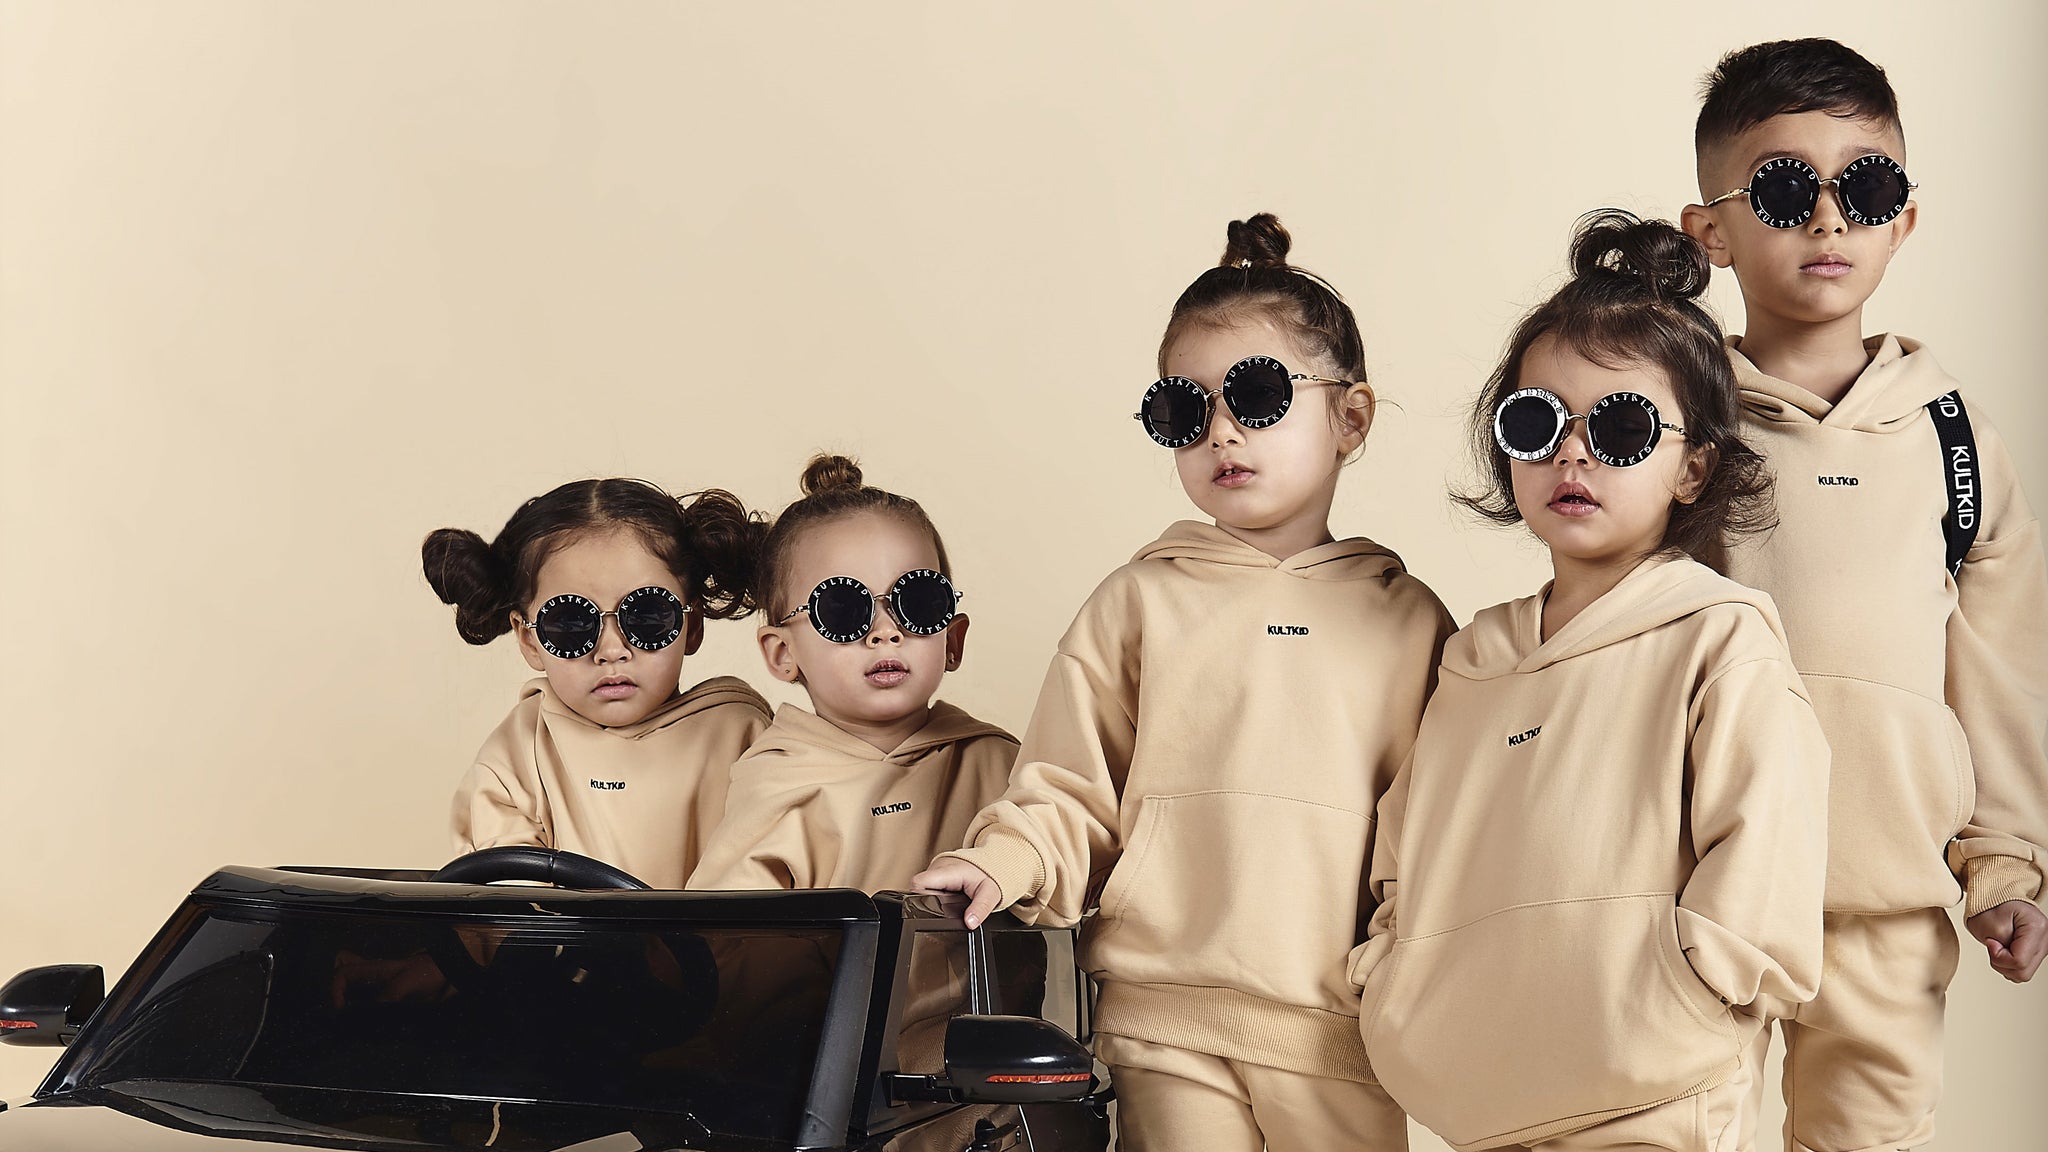 5 Kids’ Fashion Trends To Watch Out For - KULTKID